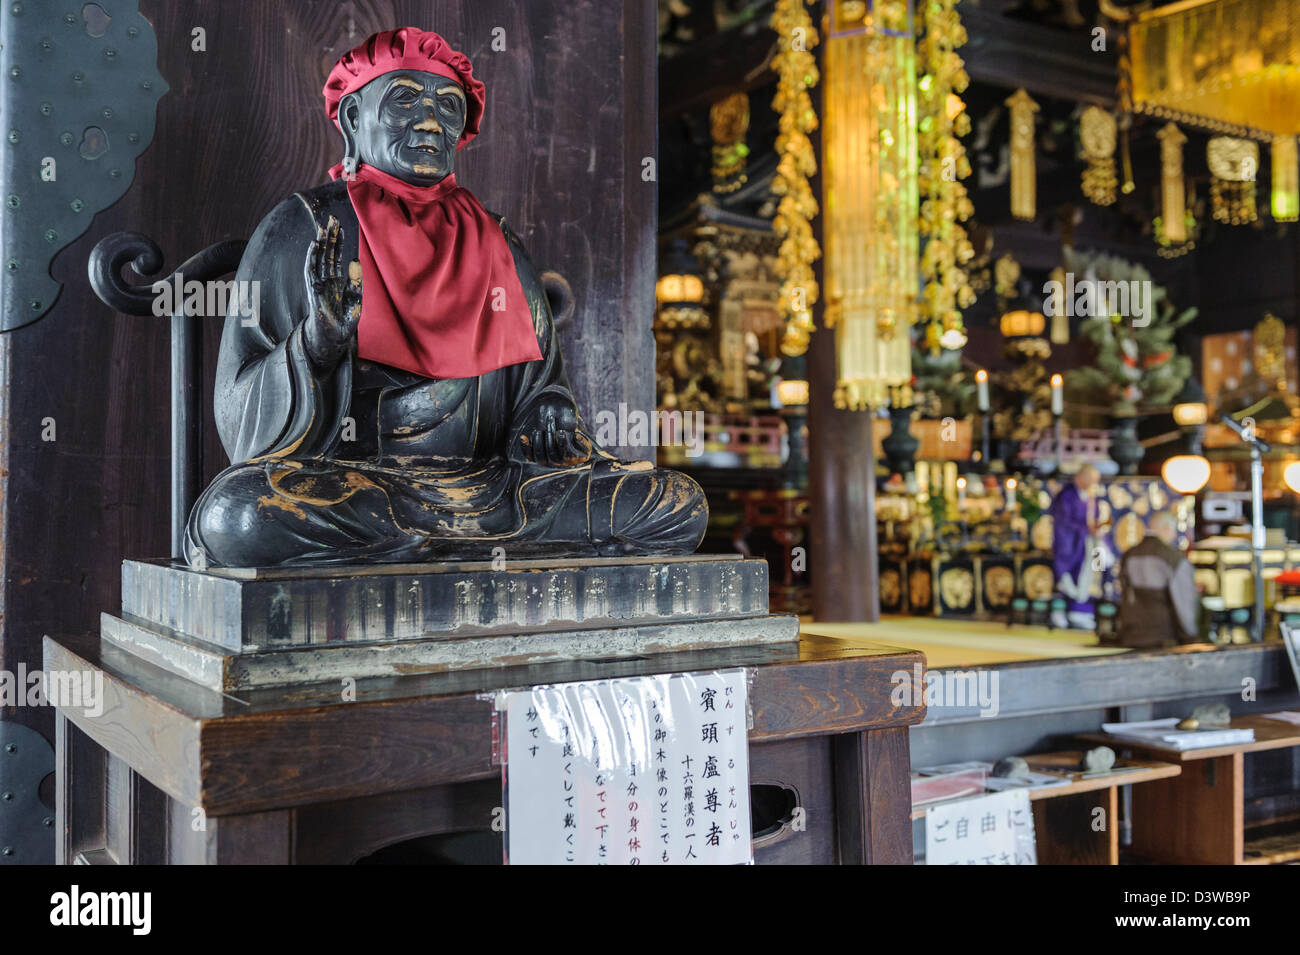 Close view of a statue inside Chion ji temple, Kyoto, Japan, Asia Stock Photo